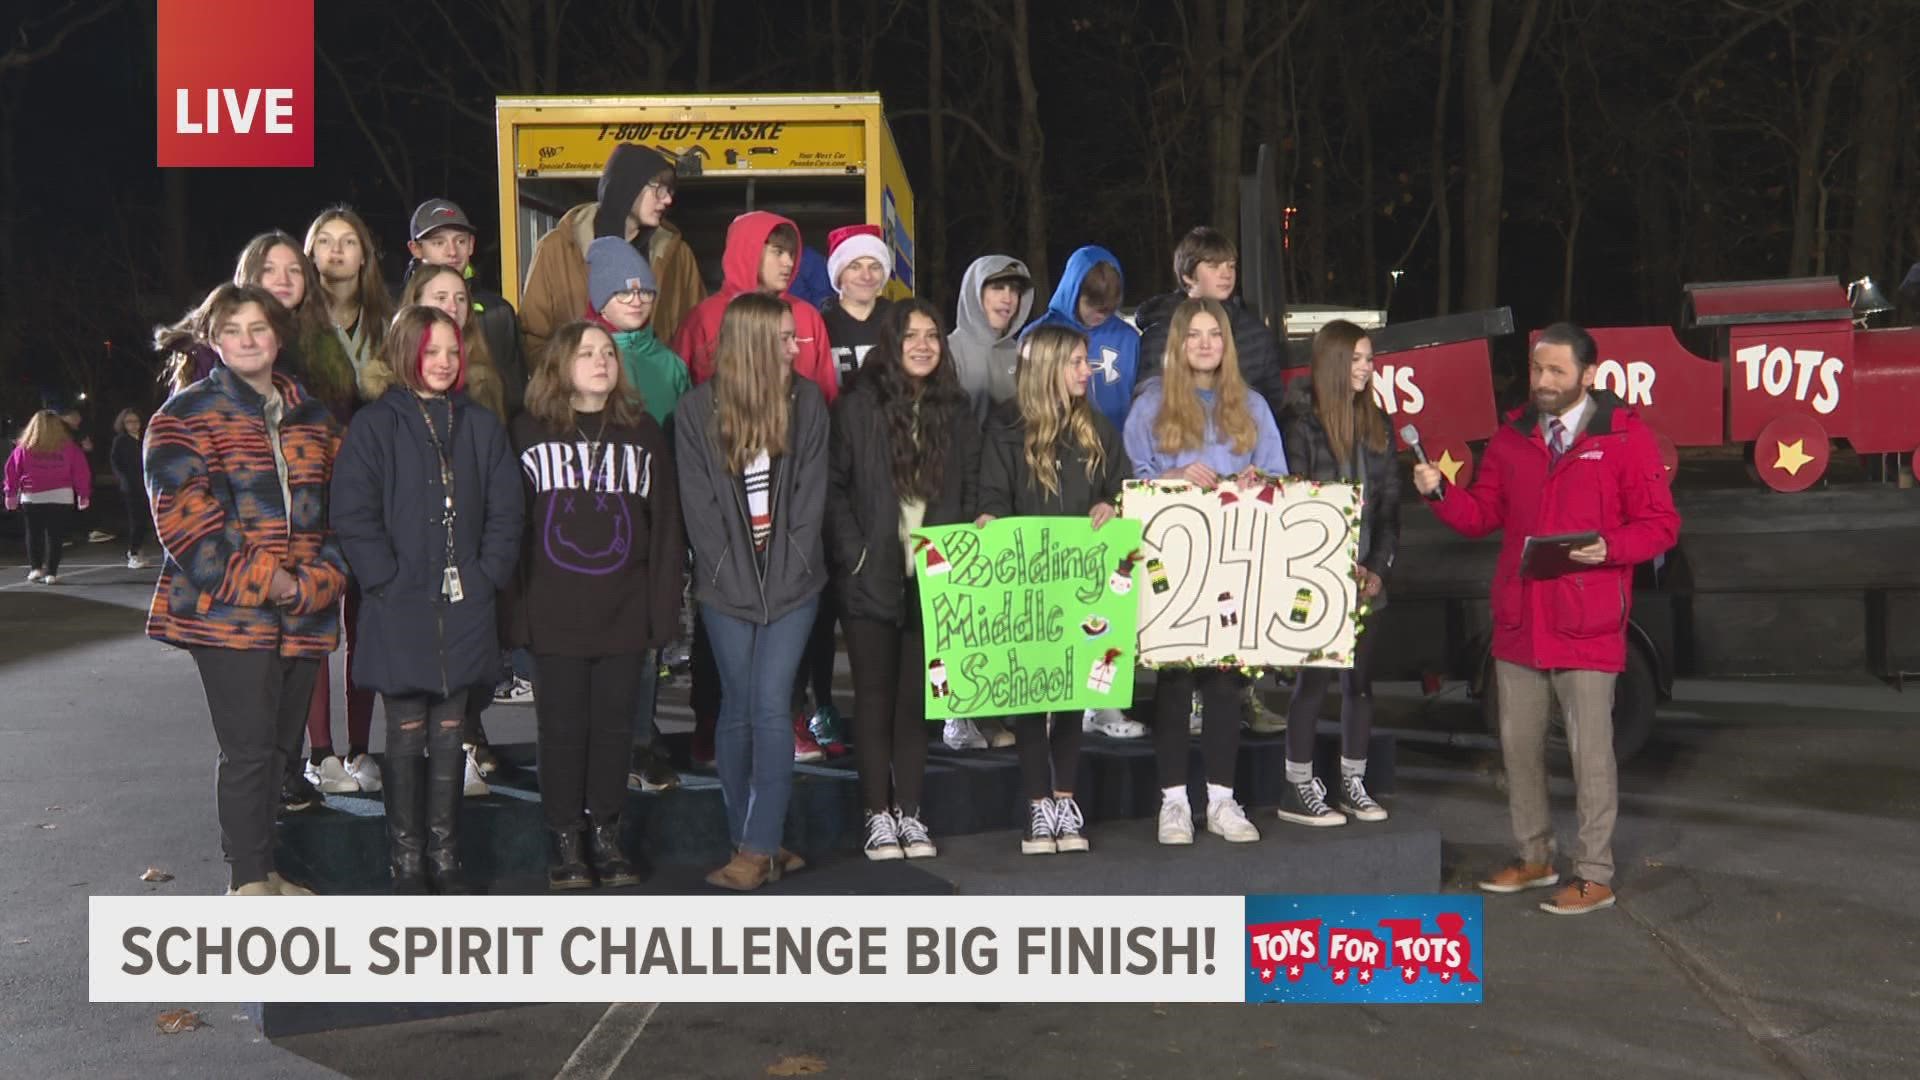 West Michigan schools and organizations are joining 13OYS for the School Spirit Challenge Big Finish, where hundreds of toys are being donated.